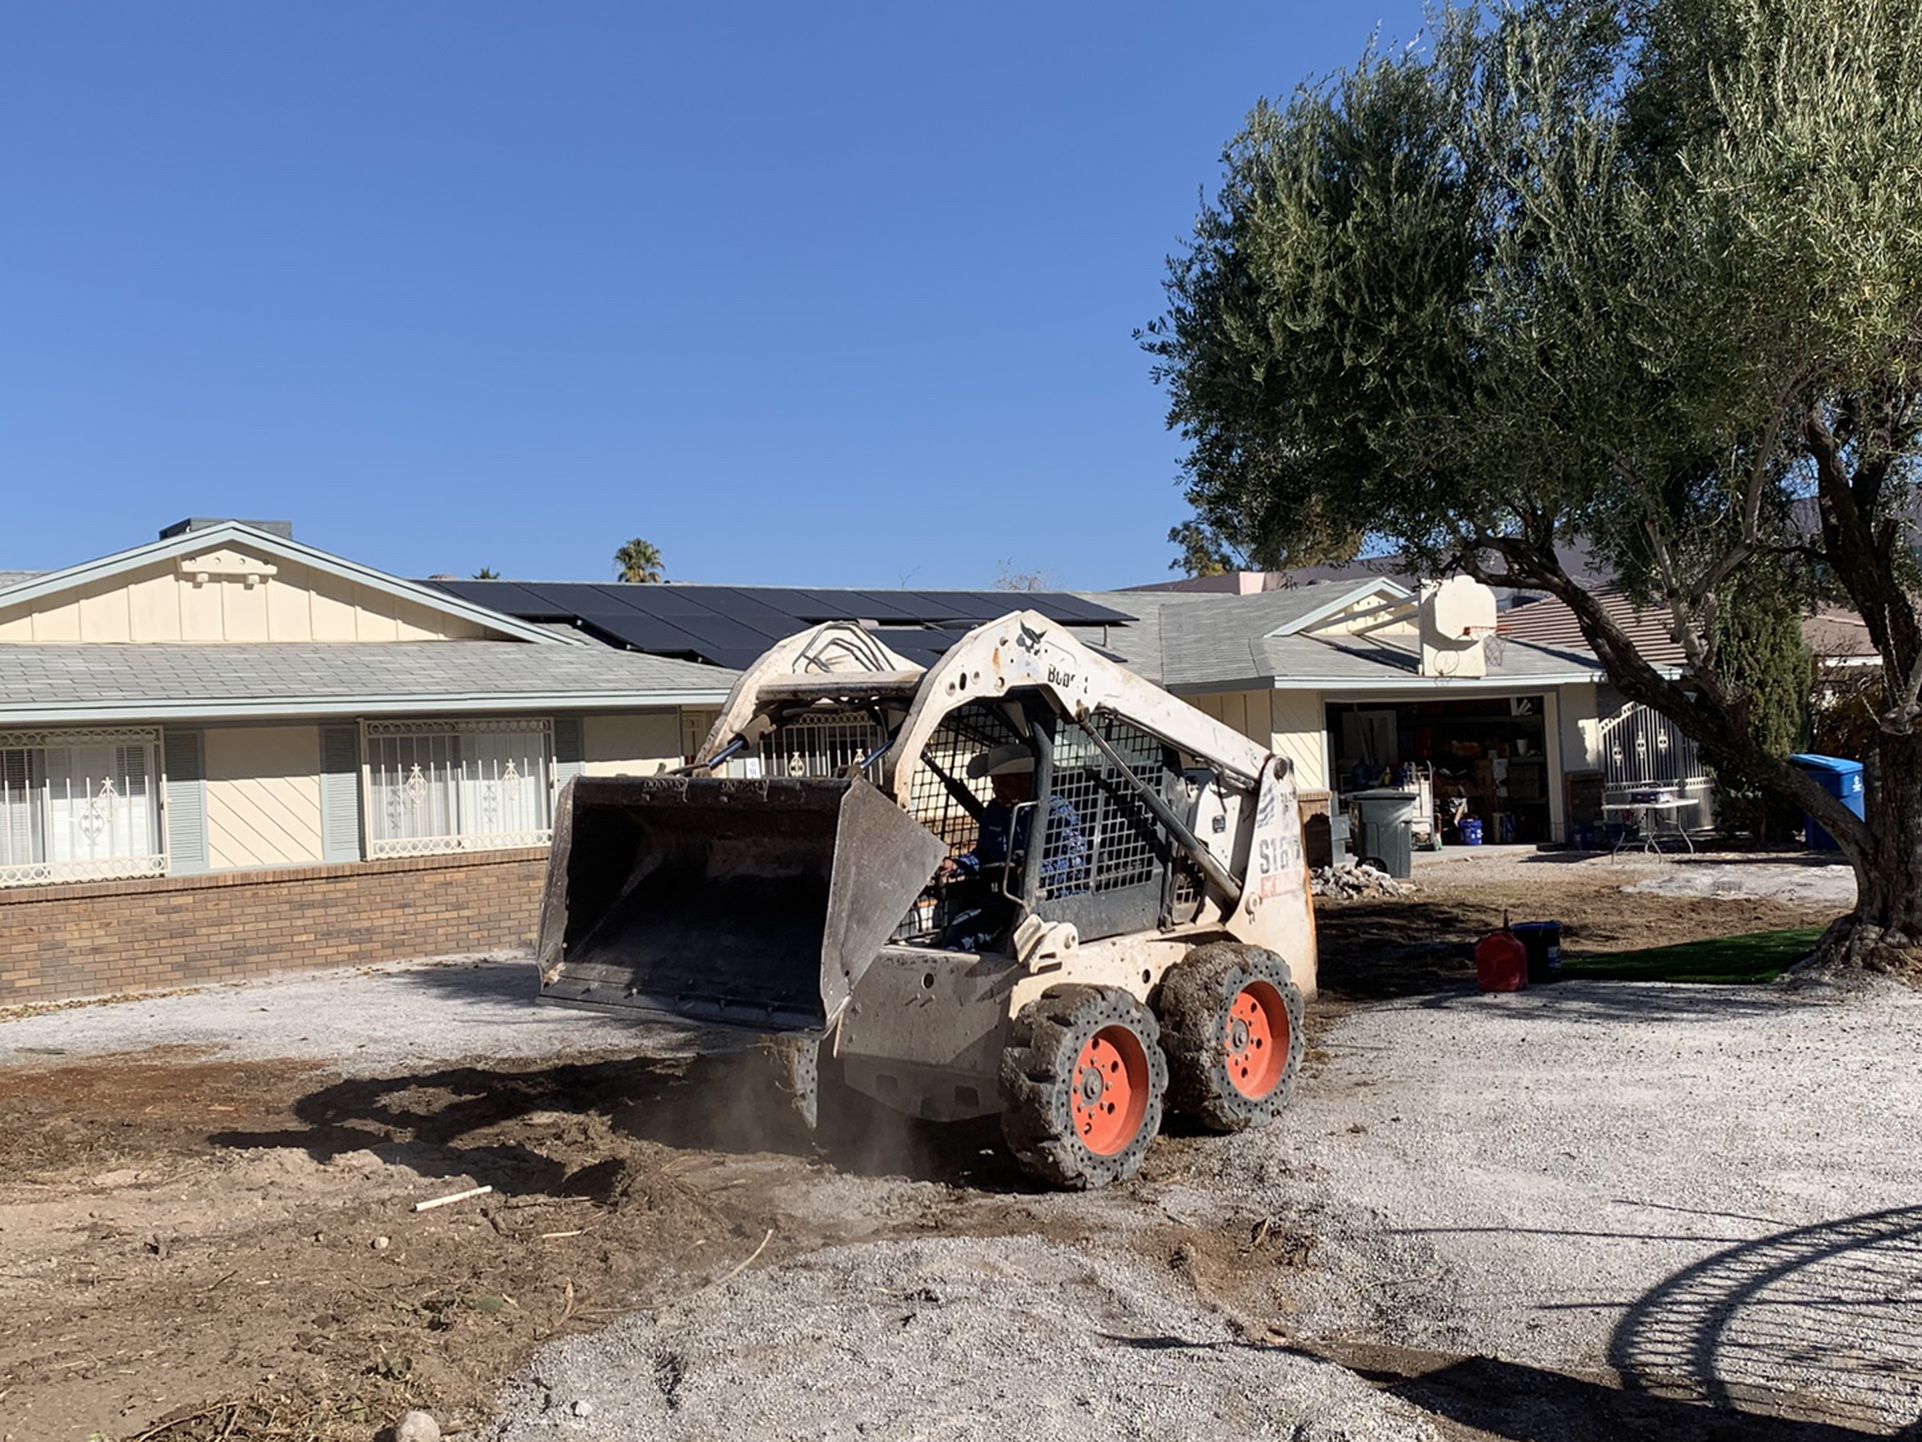 In Need Of Some Bobcat Work?